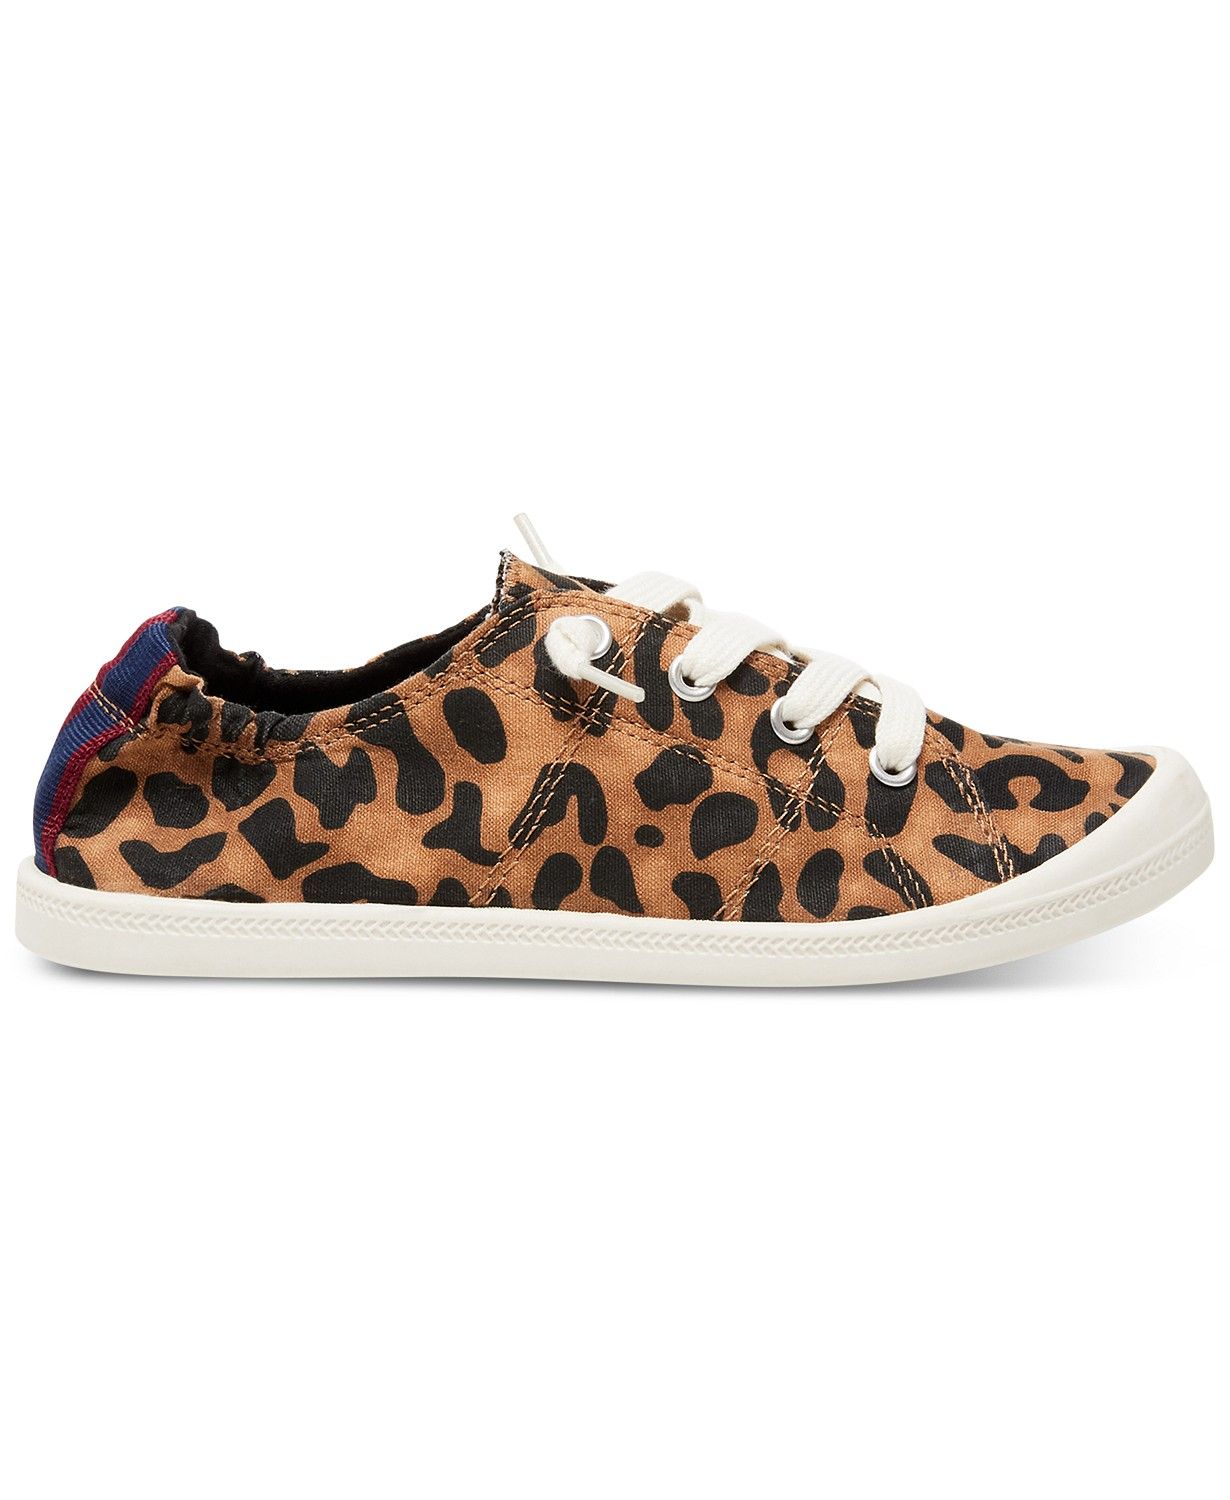 Madden Girl Baailey Sneakers & Reviews - Athletic Shoes & Sneakers - Shoes - Macy's | Macys (US)